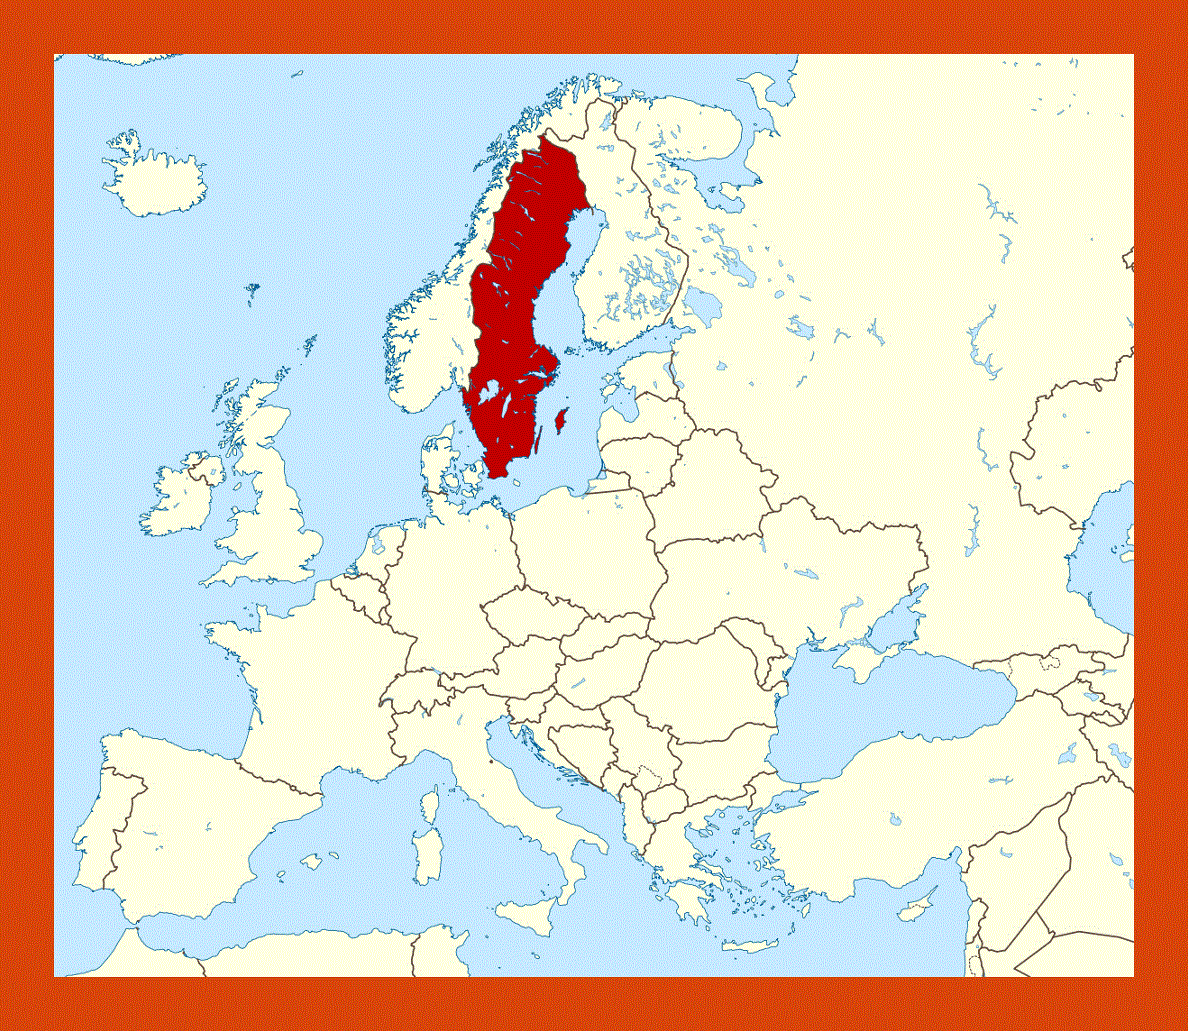 Location map of Sweden in Europe